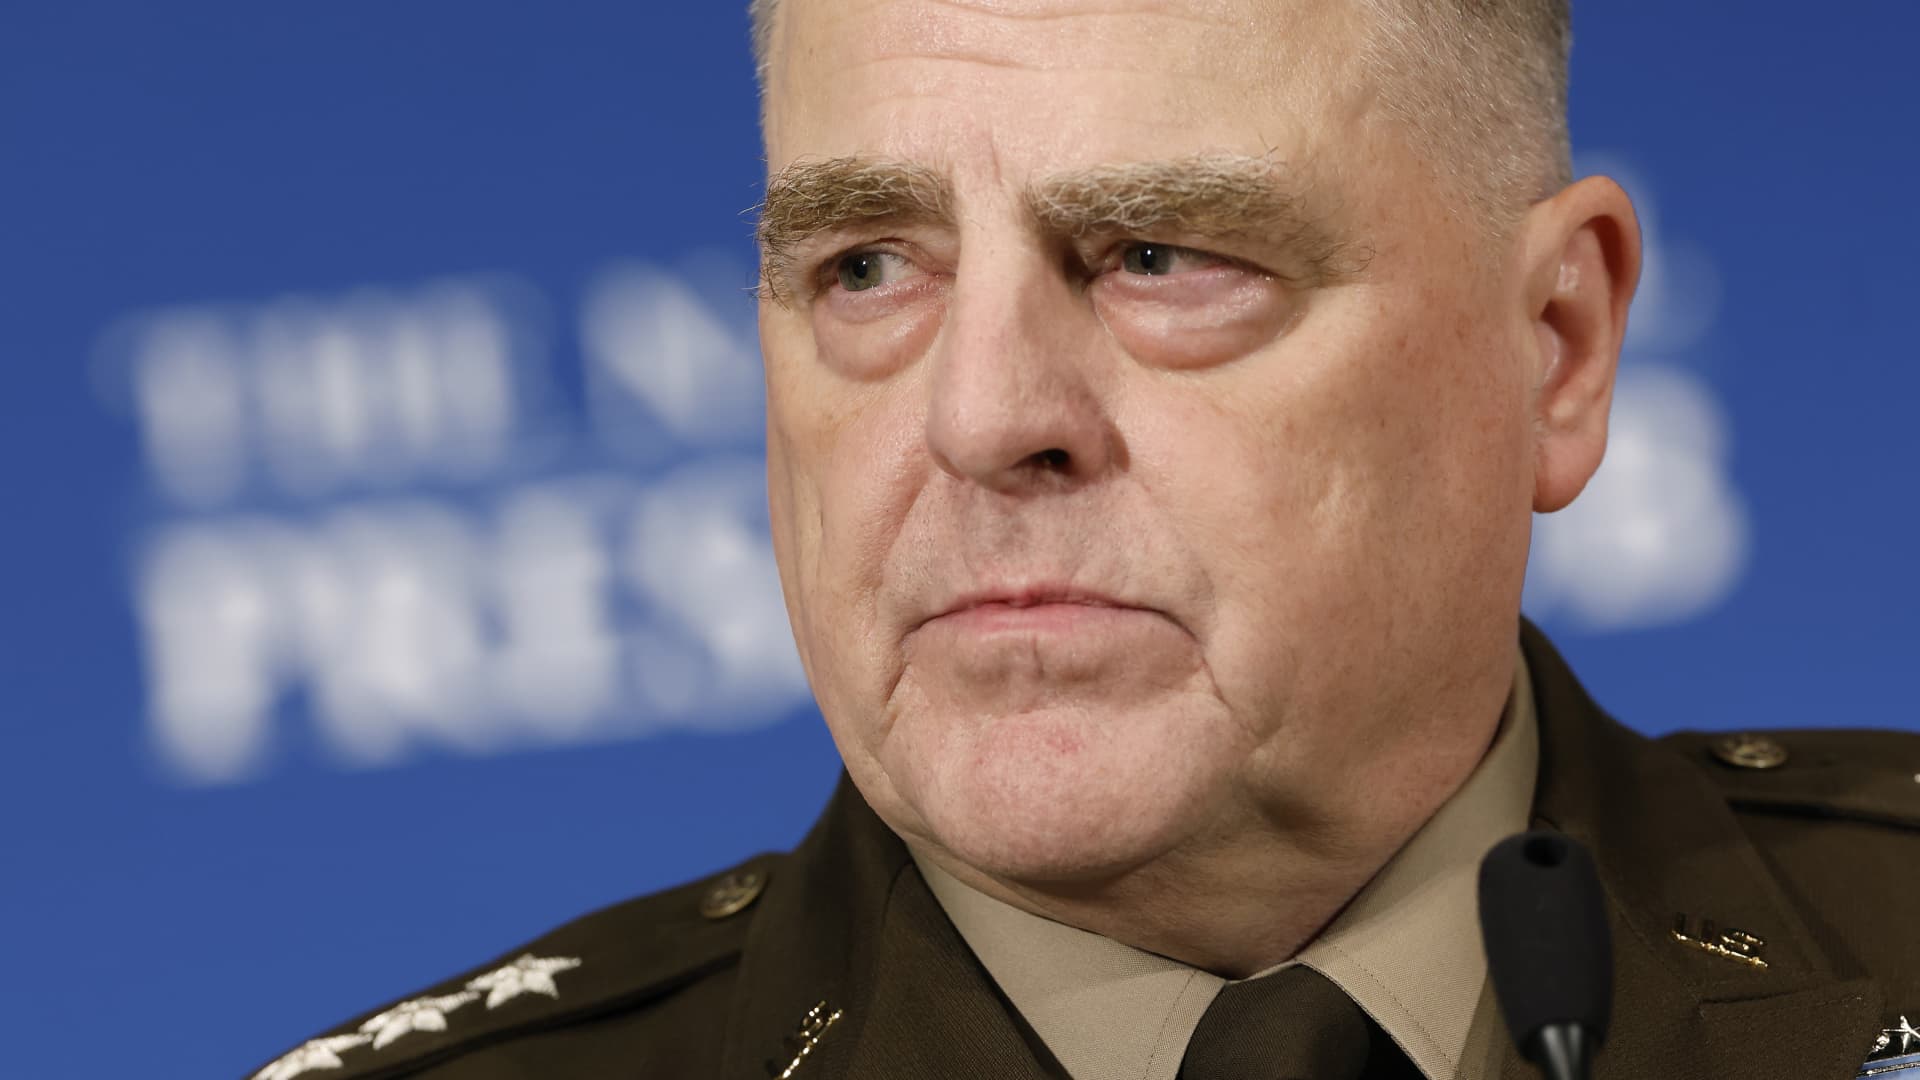 Joint Chiefs of Staff Chairman General Mark Milley speaks during the Headliners Luncheon at the National Press Club on June 30, 2023 in Washington, DC.